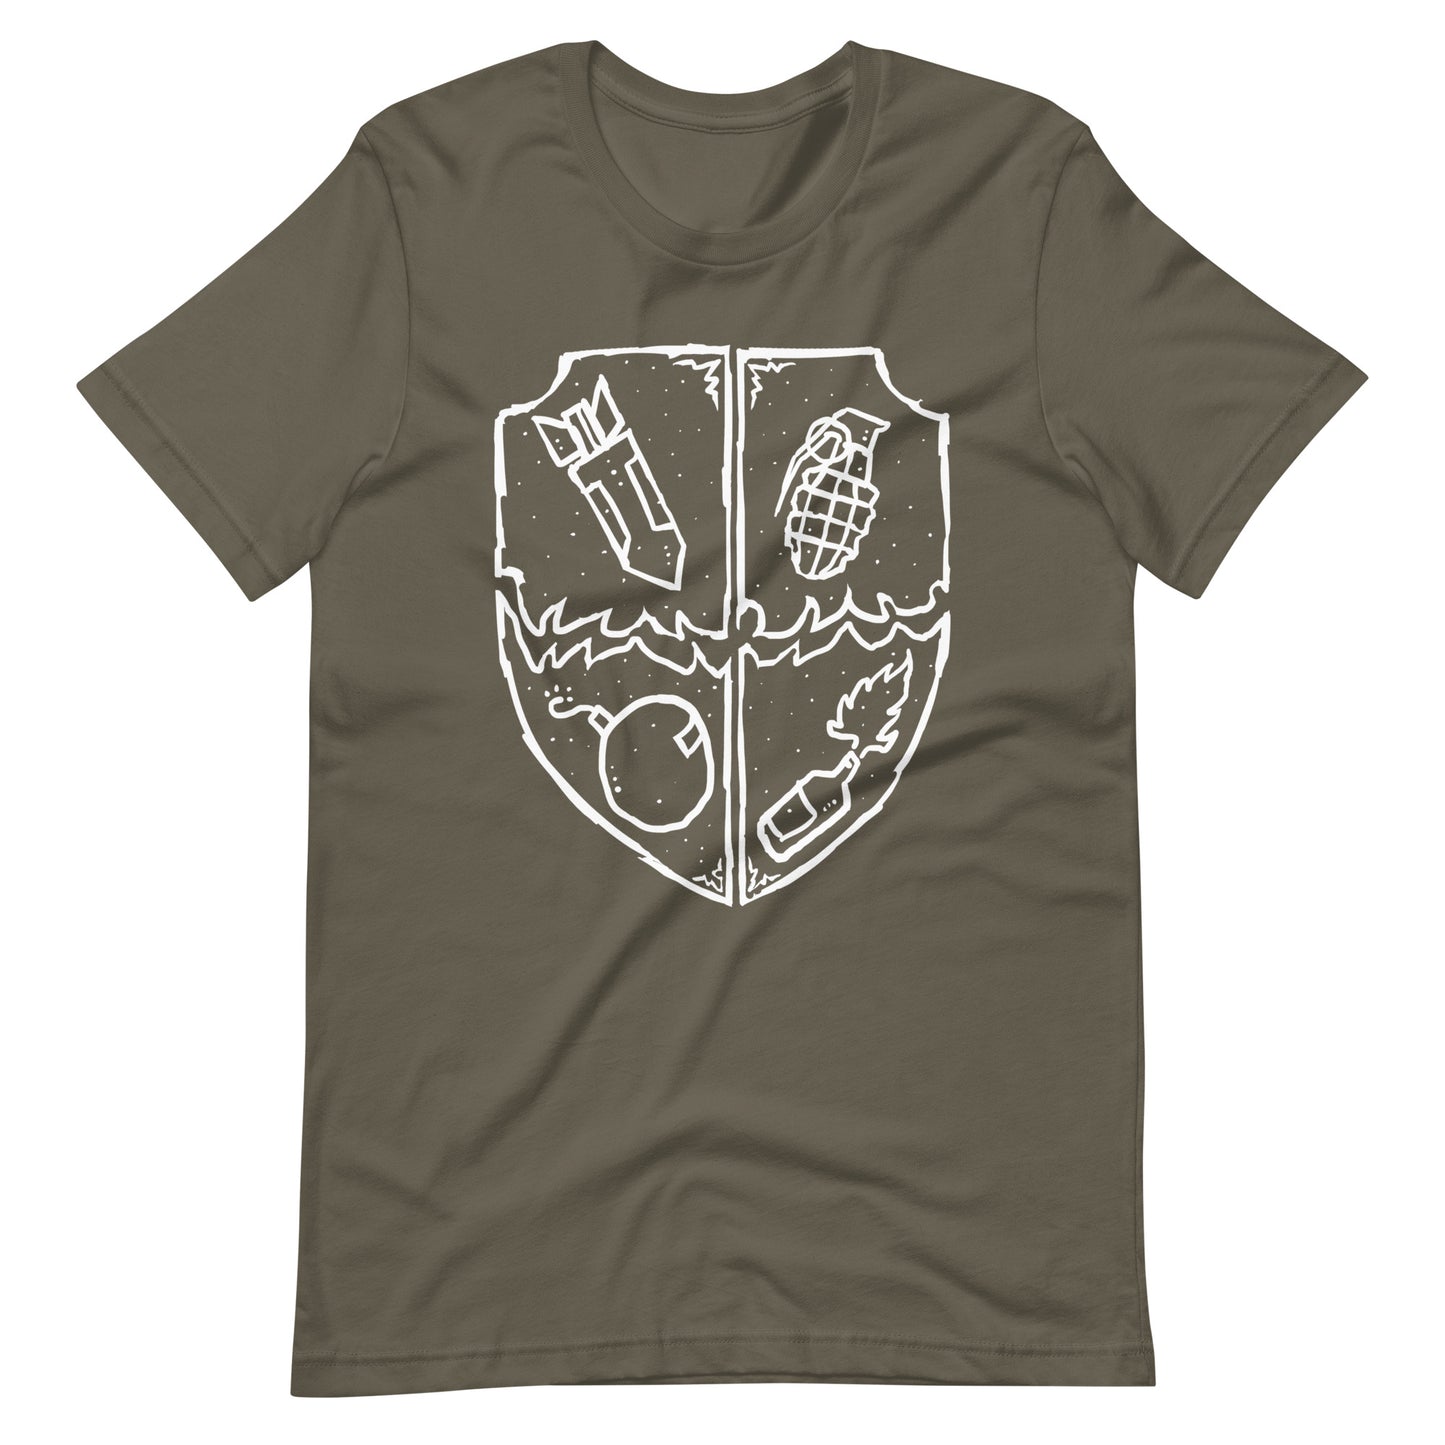 Boom - Men's t-shirt - Army Front